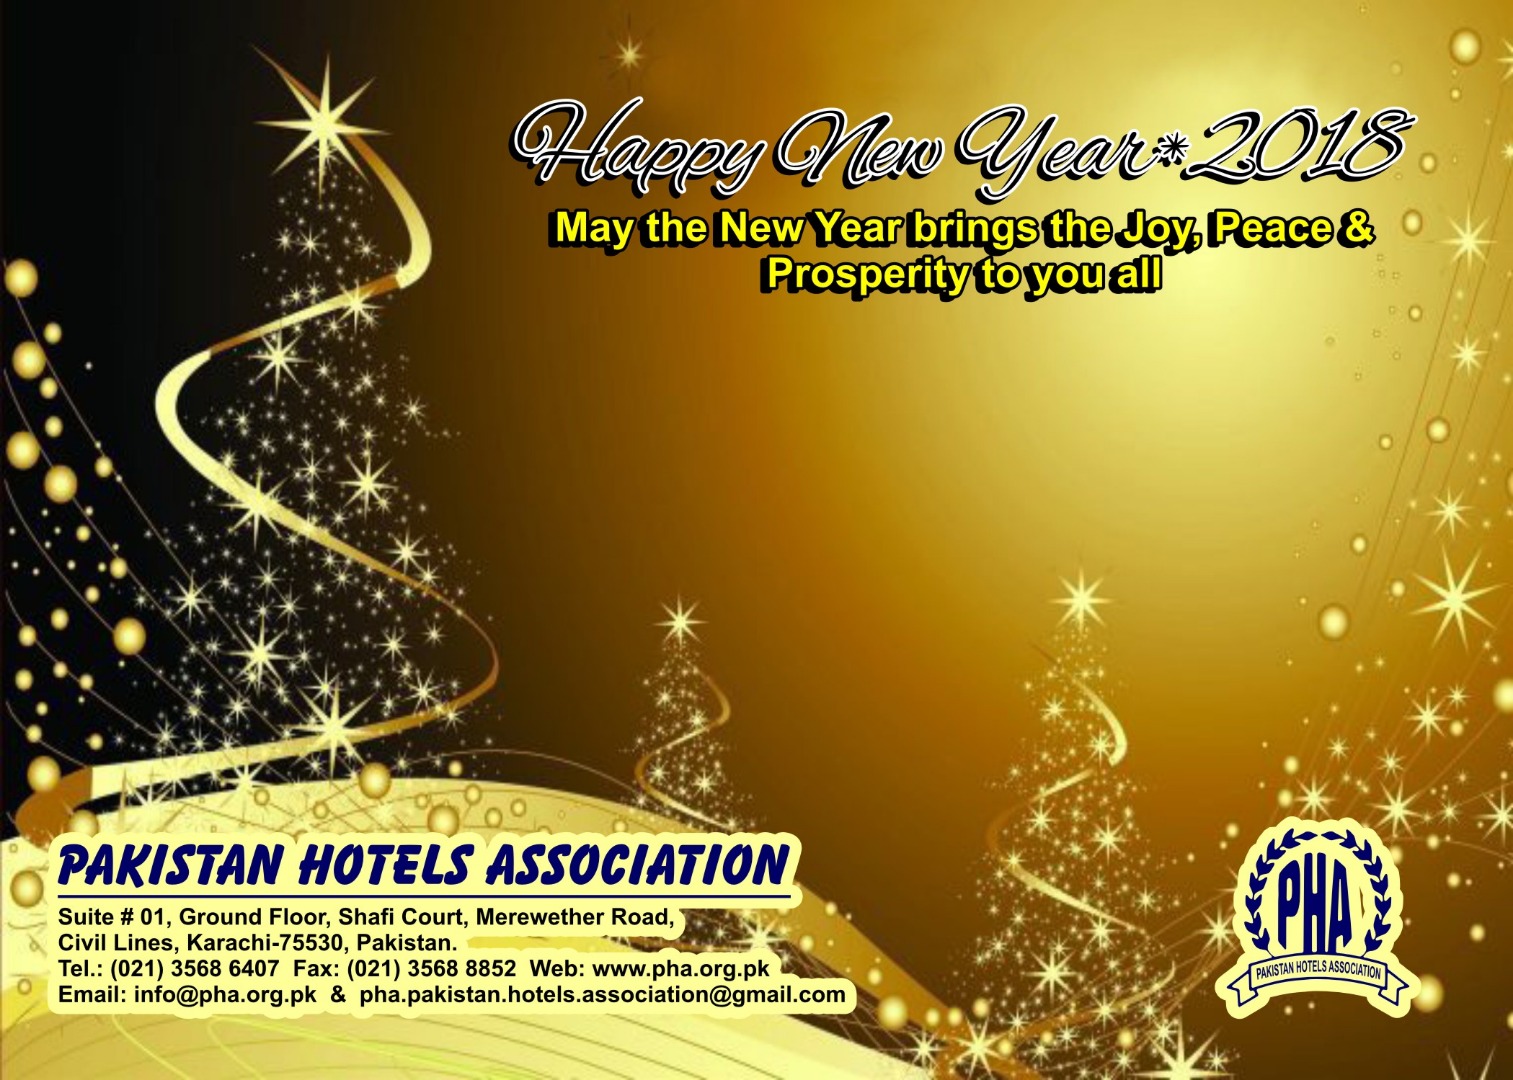 Welcome to a new year and a new chapter with us at Pakistan Hotels Association